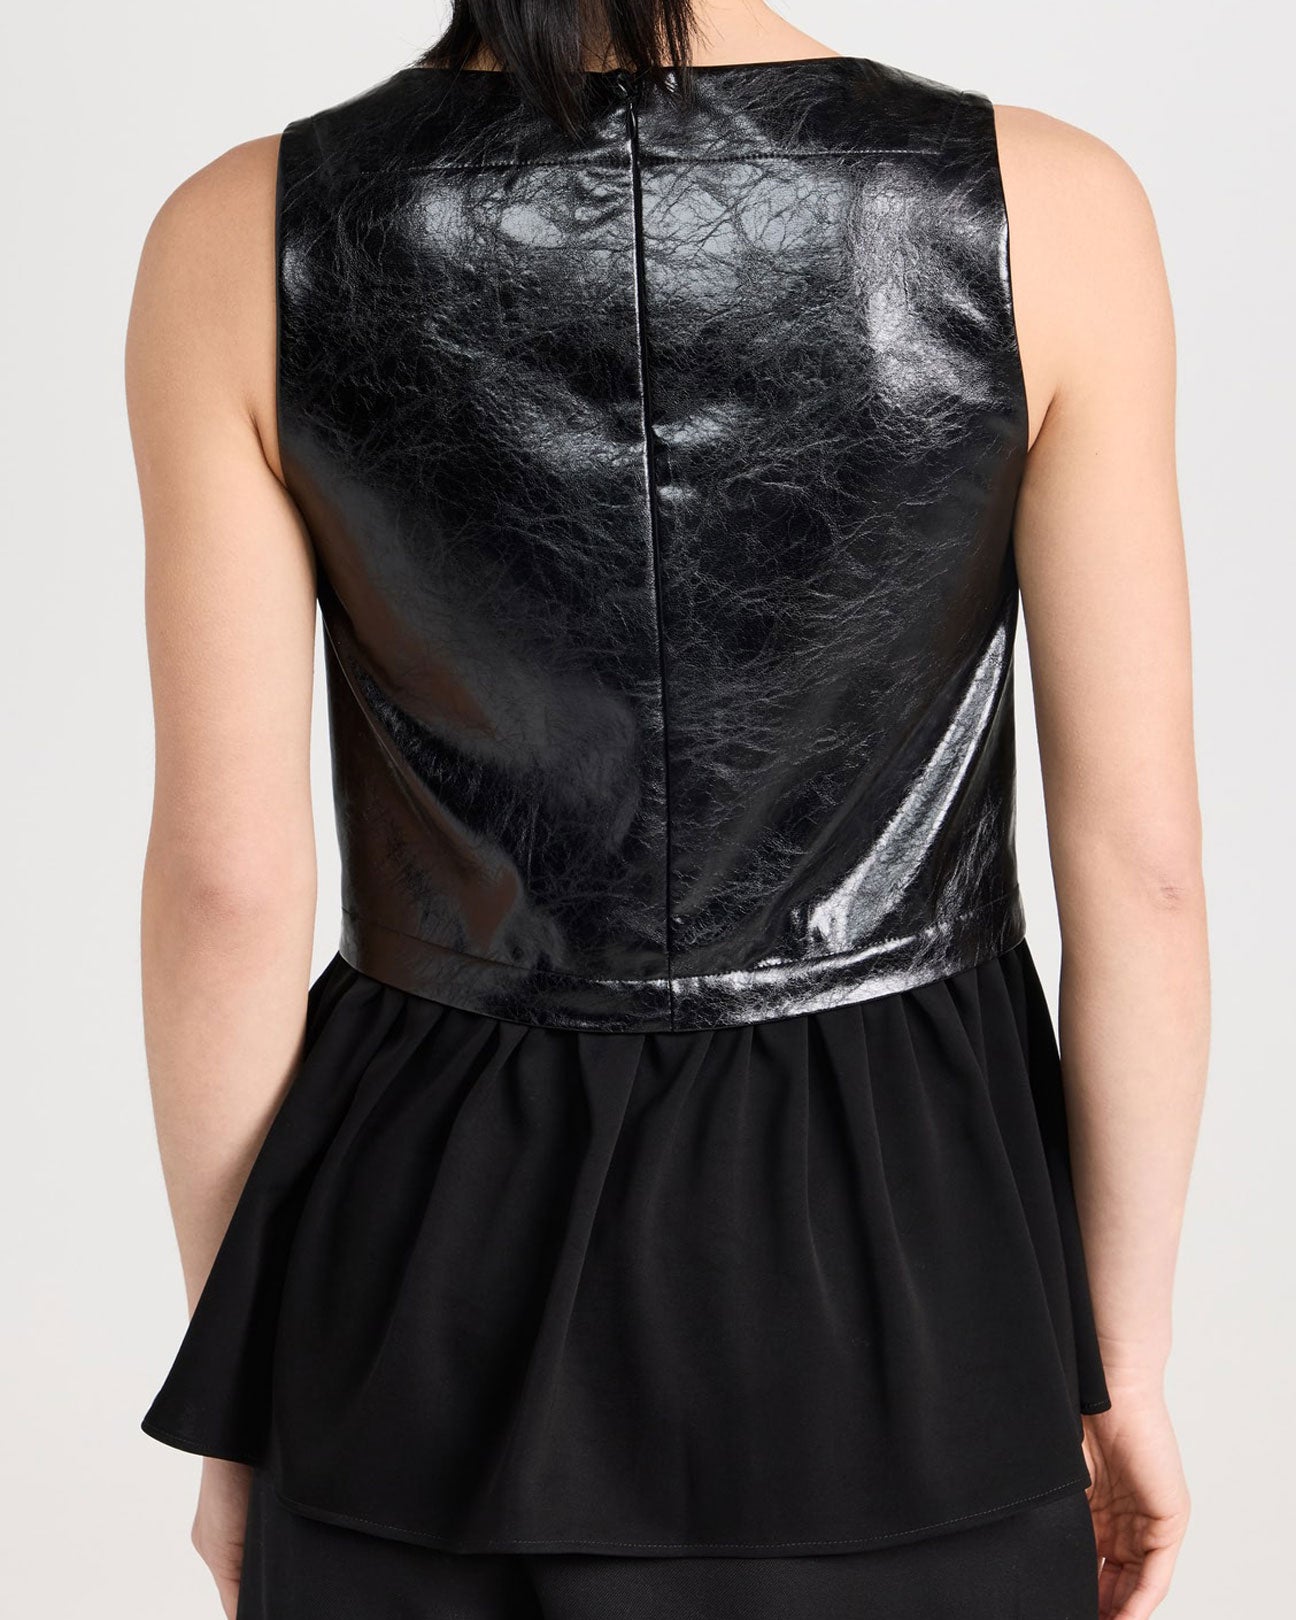 AKNVAS Kavi Vegan Leather Top in Black available at Lahn.shop